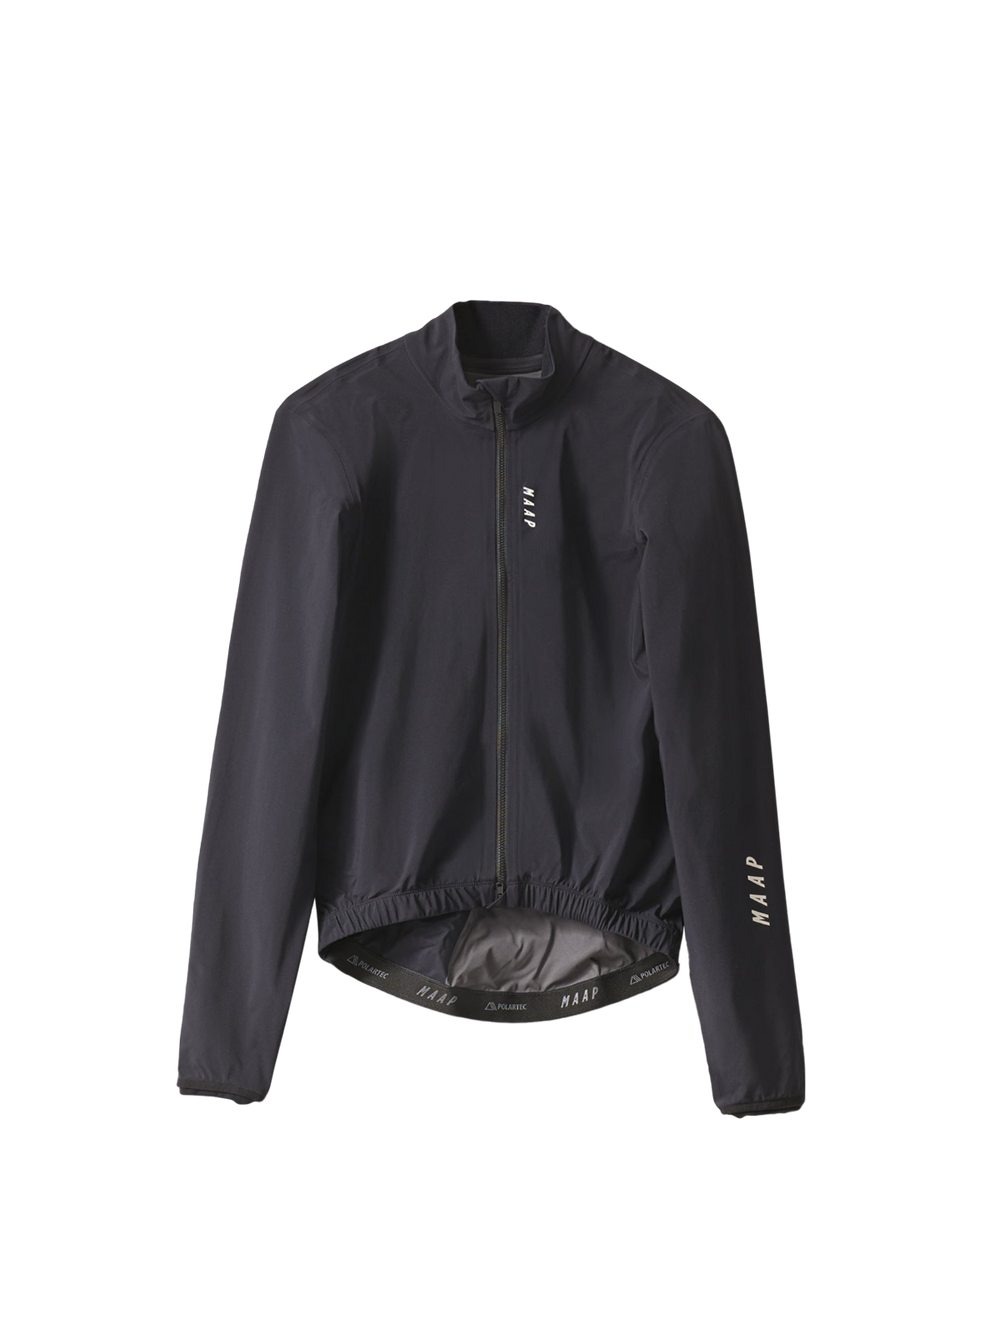 Product Image for Prime Jacket